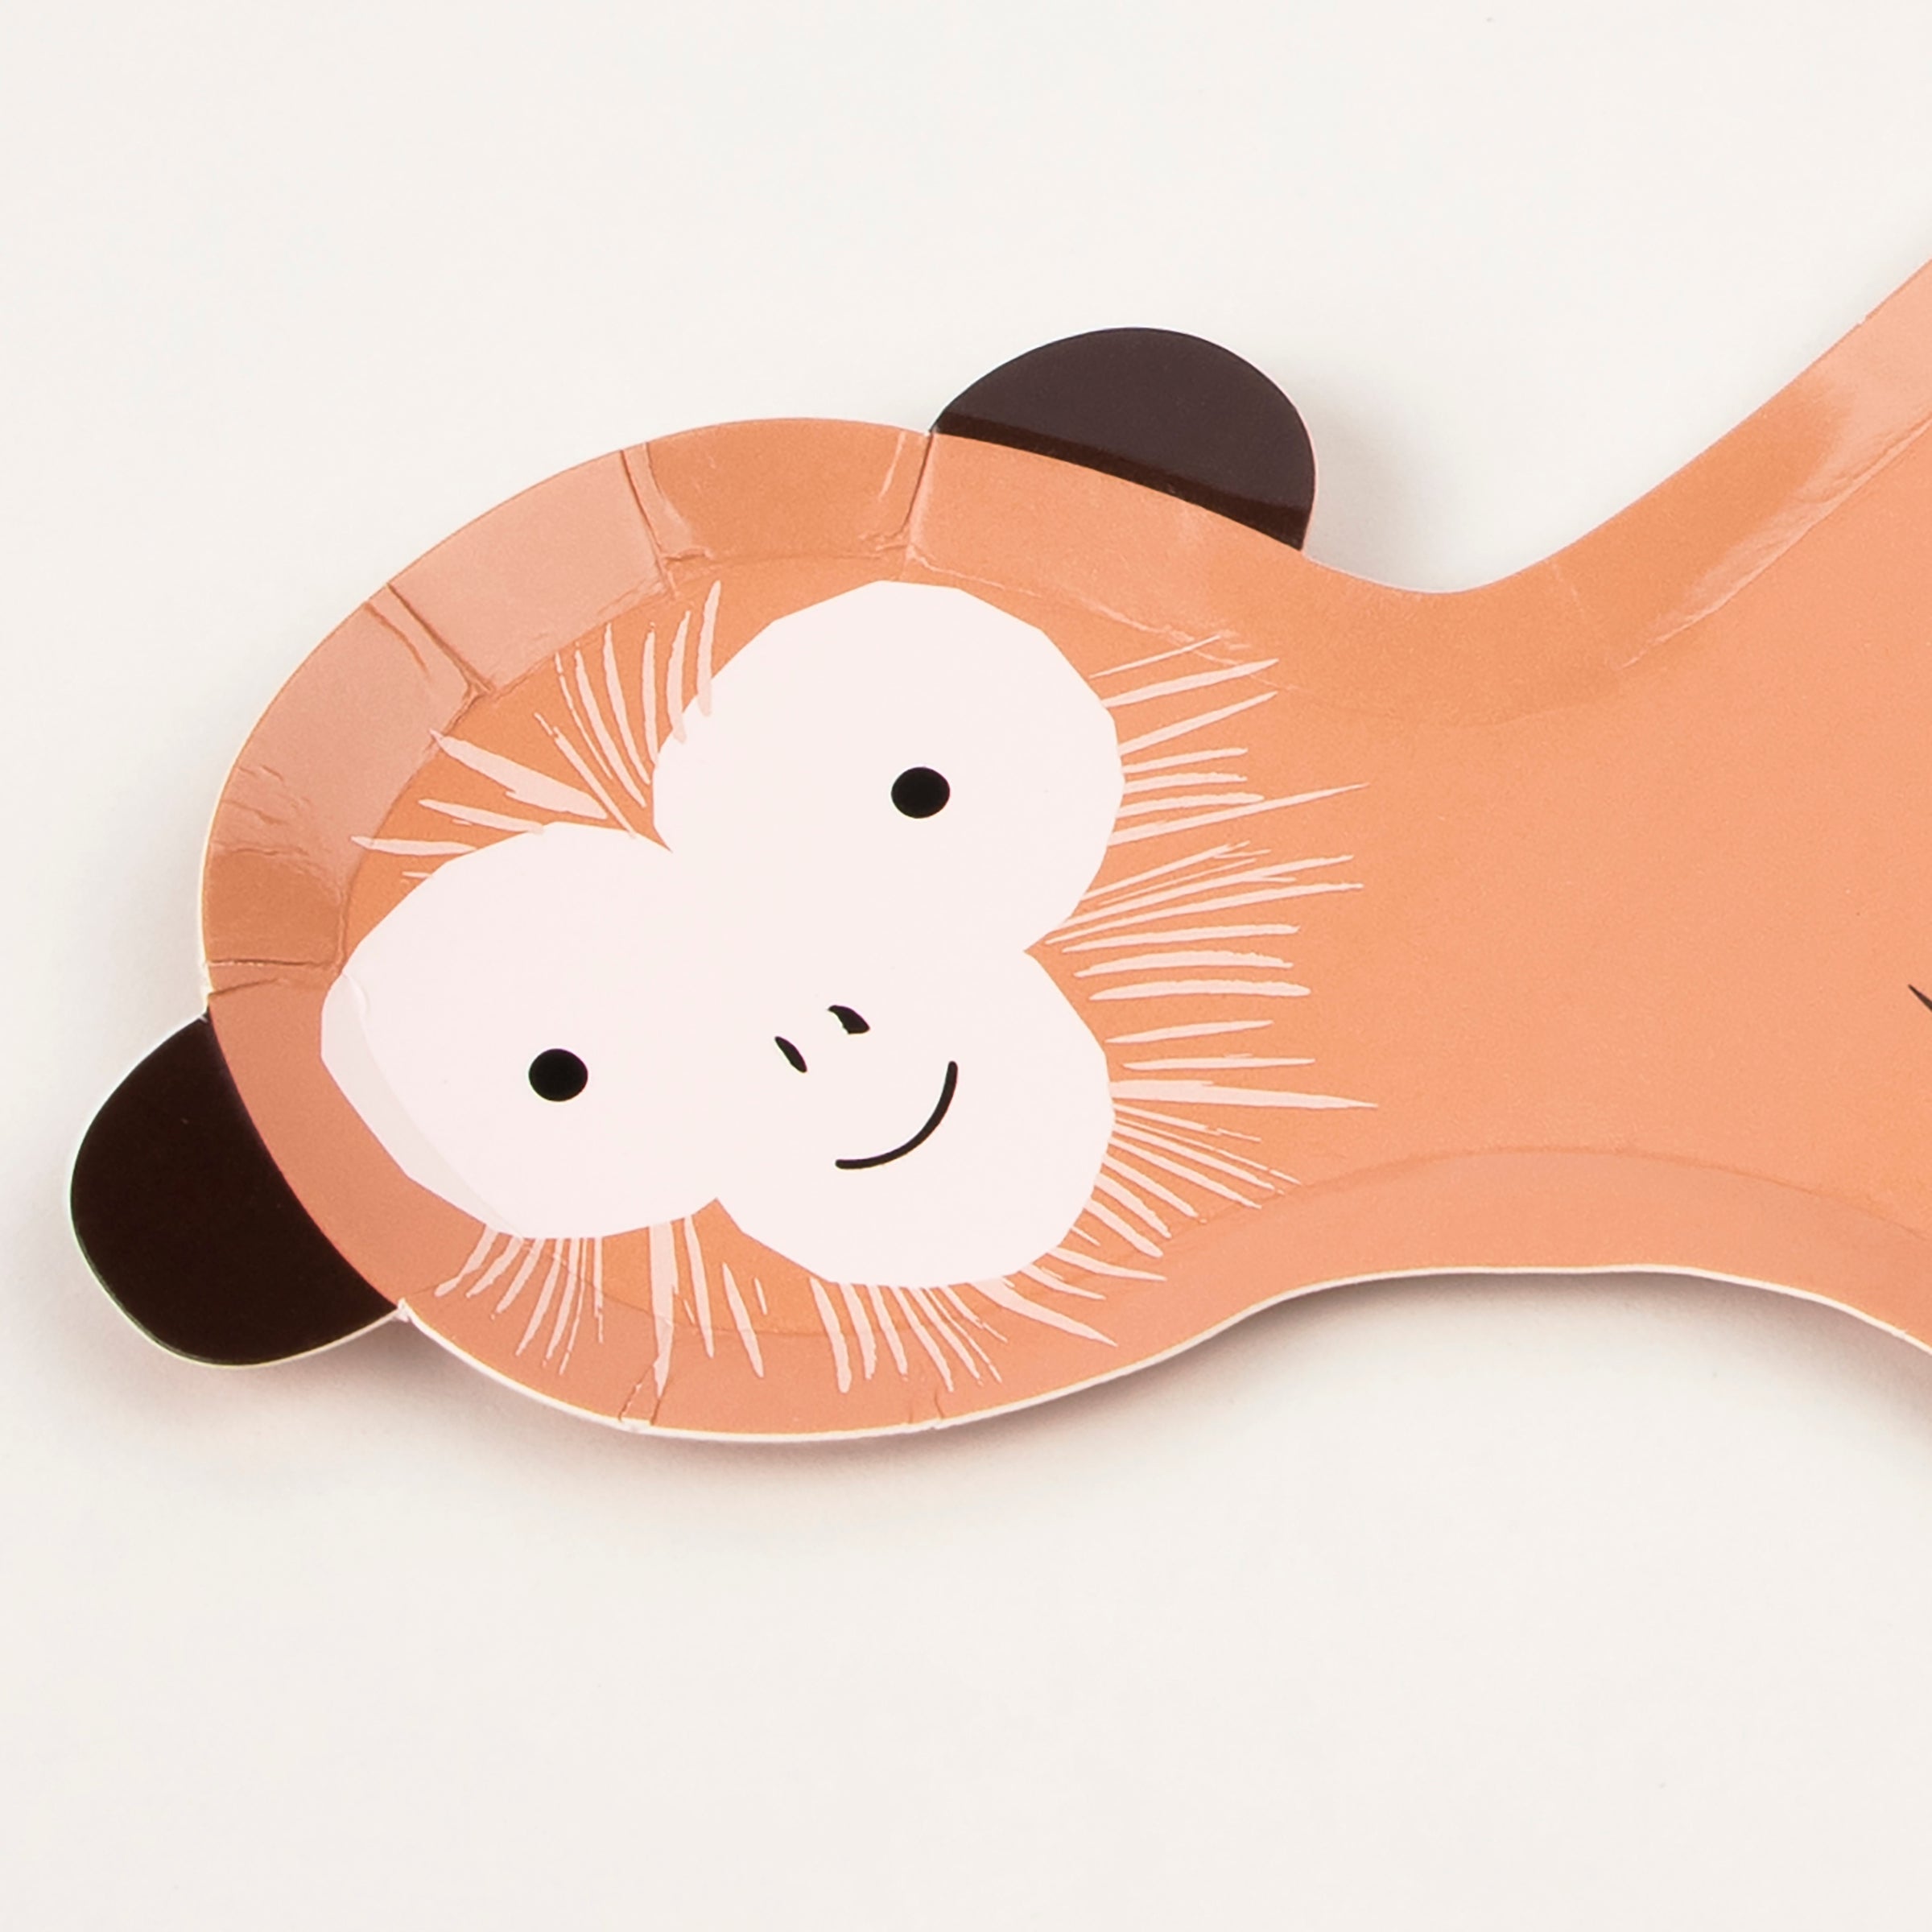 Our party plates, crafted in the shape of a monkey with a 3D tail, are ideal for a jungle birthday party or safari party.